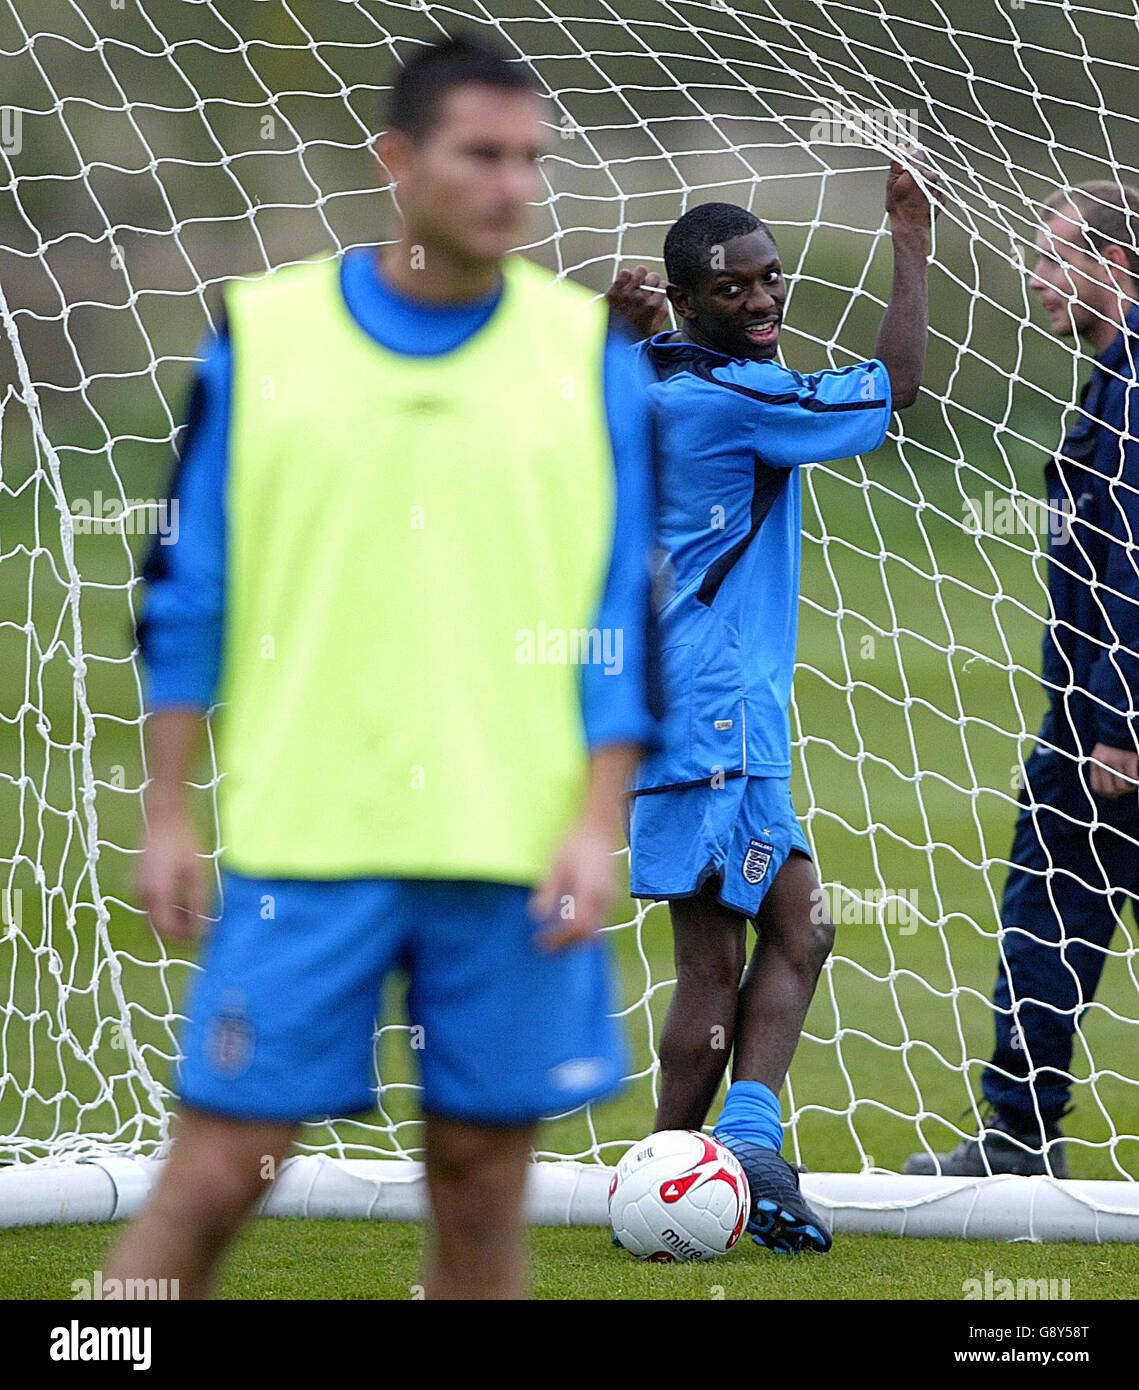 England's Shaun Wright-Phillips (R) looks on during a training session at Carrington Training Ground, Manchester, Tuesday October 4, 2005. England play Austria in their World Cup qualifying match on Saturday. PRESS ASSOCIATION Photo. Photo credit should read: Martin Rickett/PA. Stock Photo